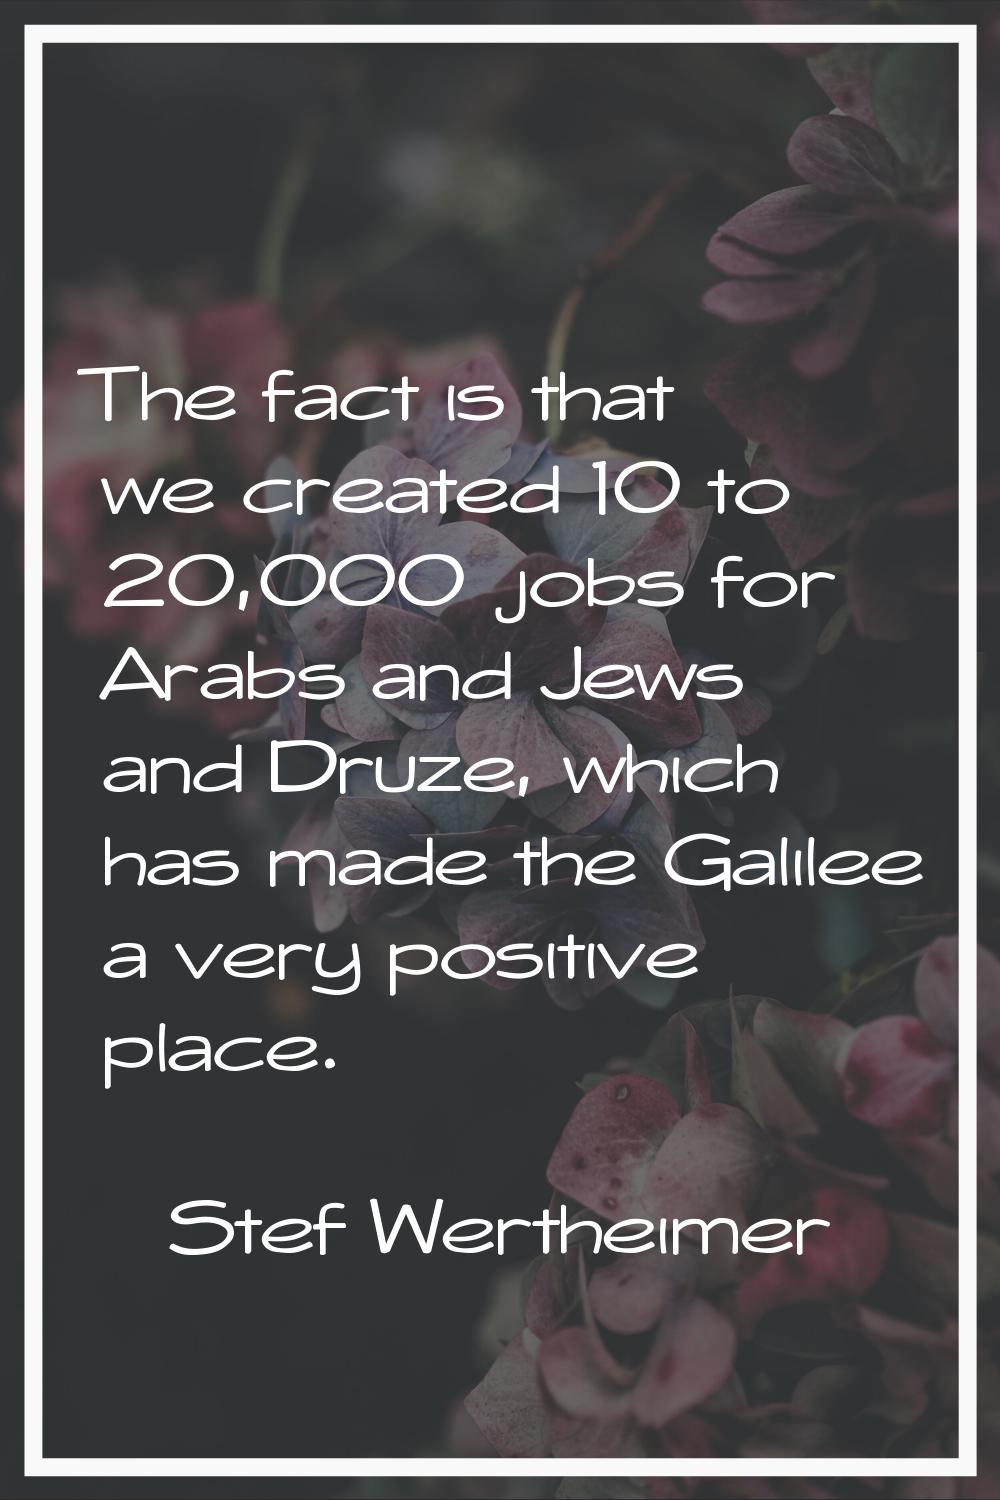 The fact is that we created 10 to 20,000 jobs for Arabs and Jews and Druze, which has made the Gali